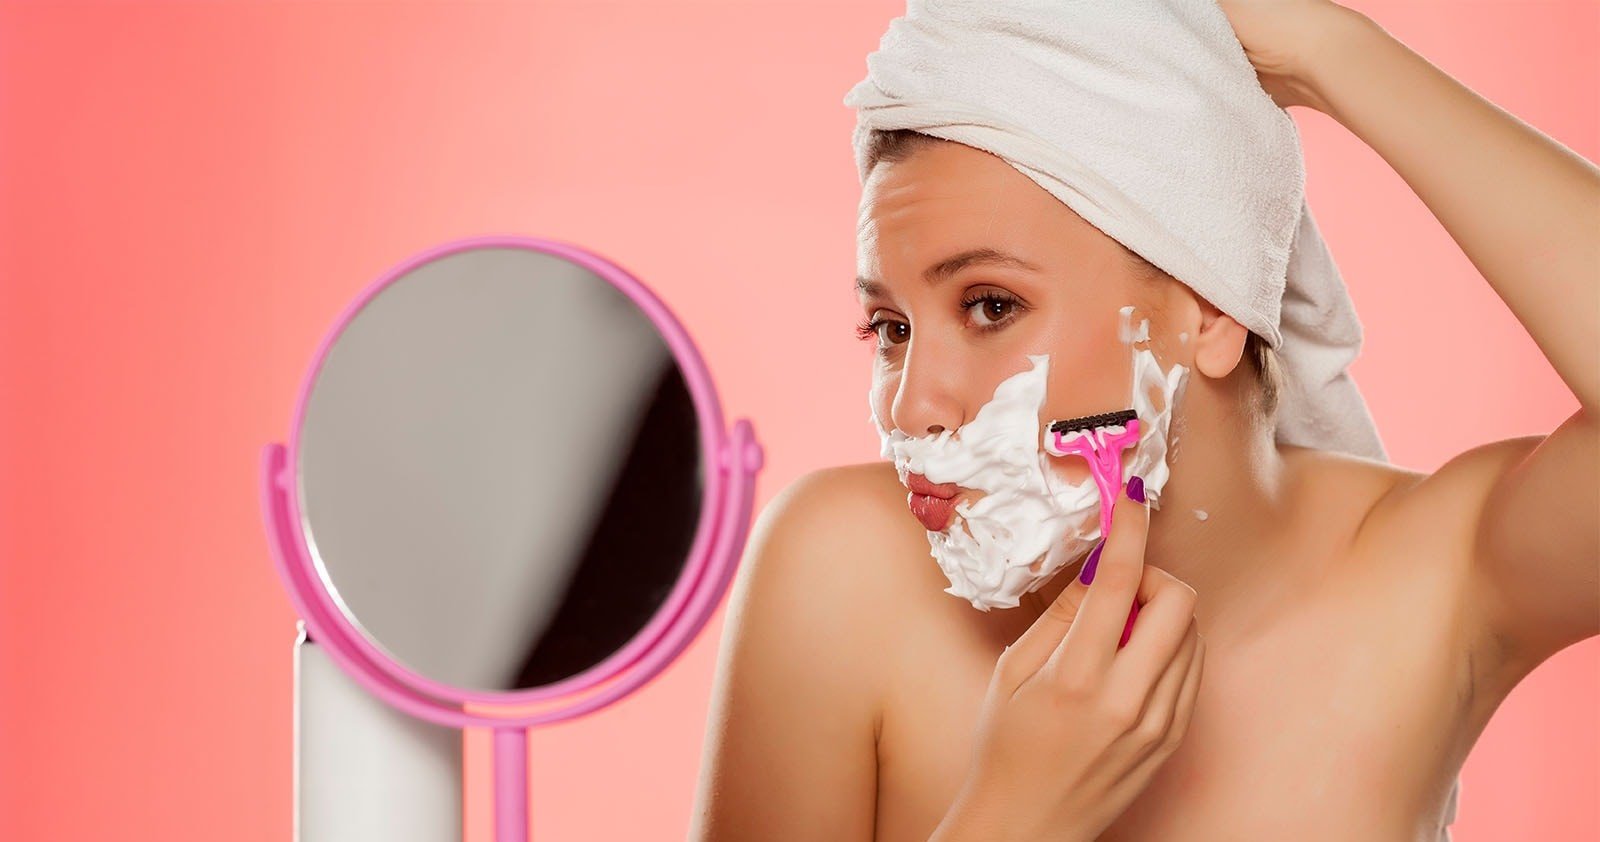 Is Shaving Your Face Bad? Face Shaving for Men and Women